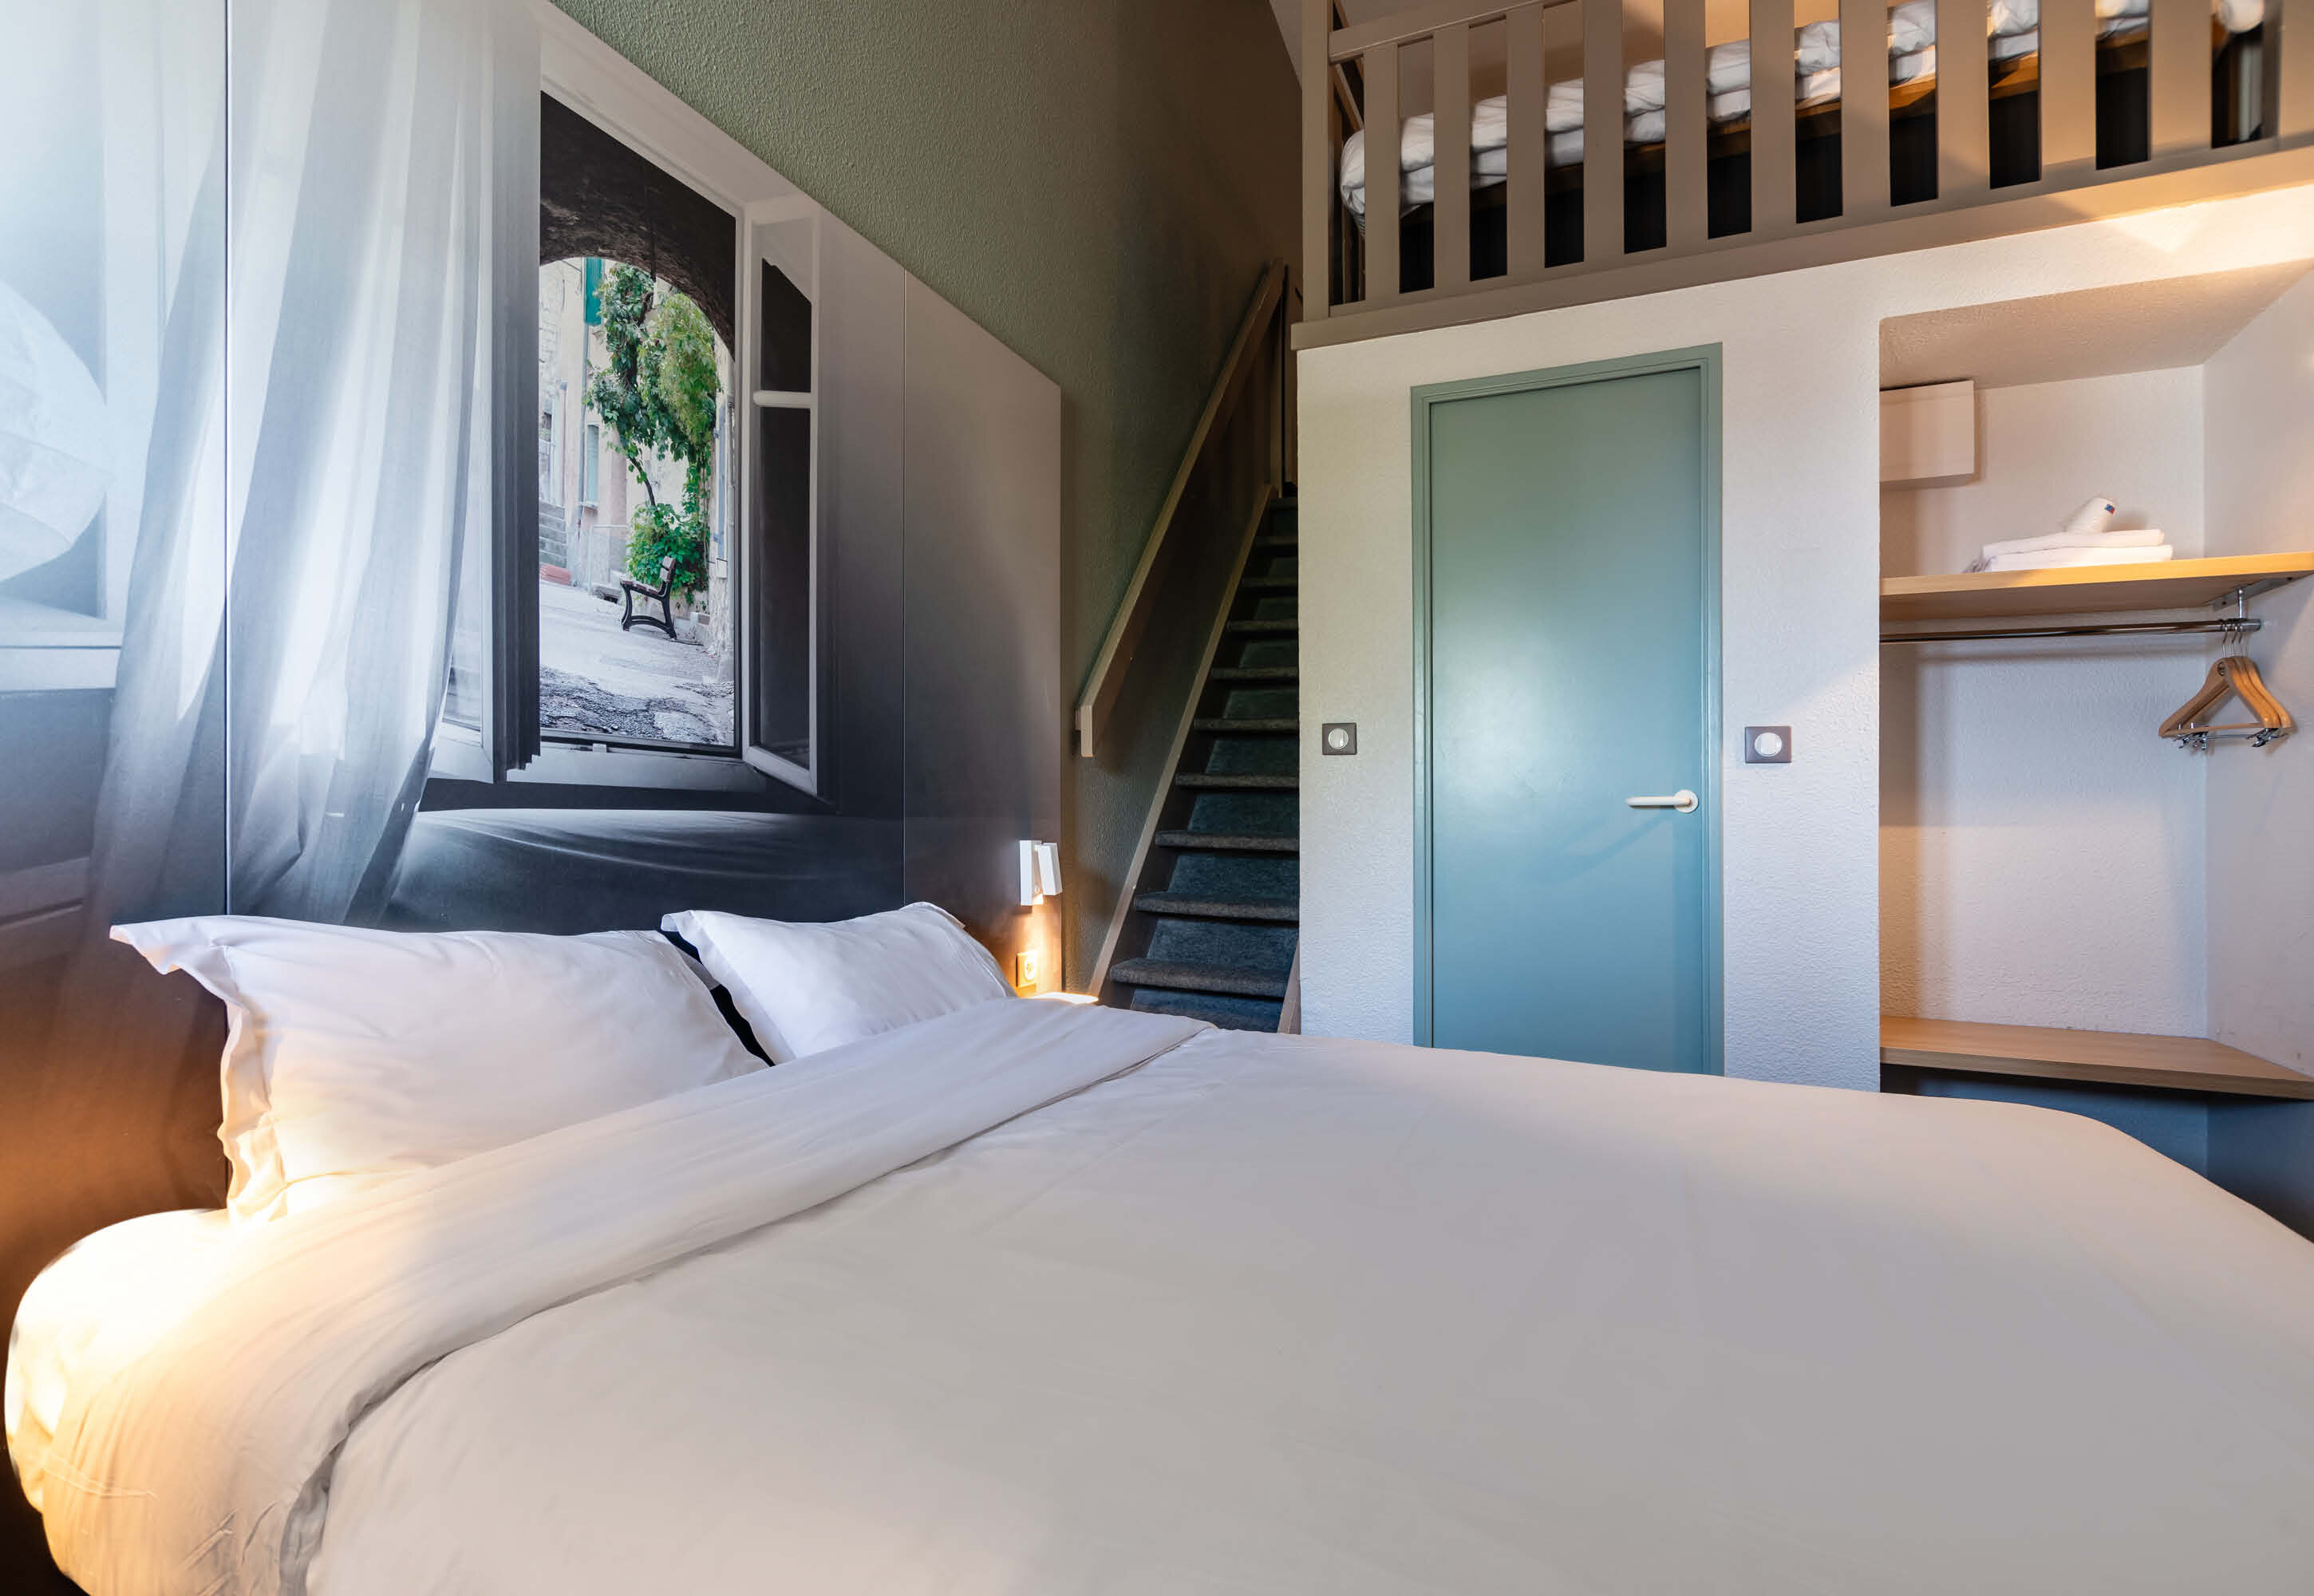 Images B&B HOTEL Valence Nord